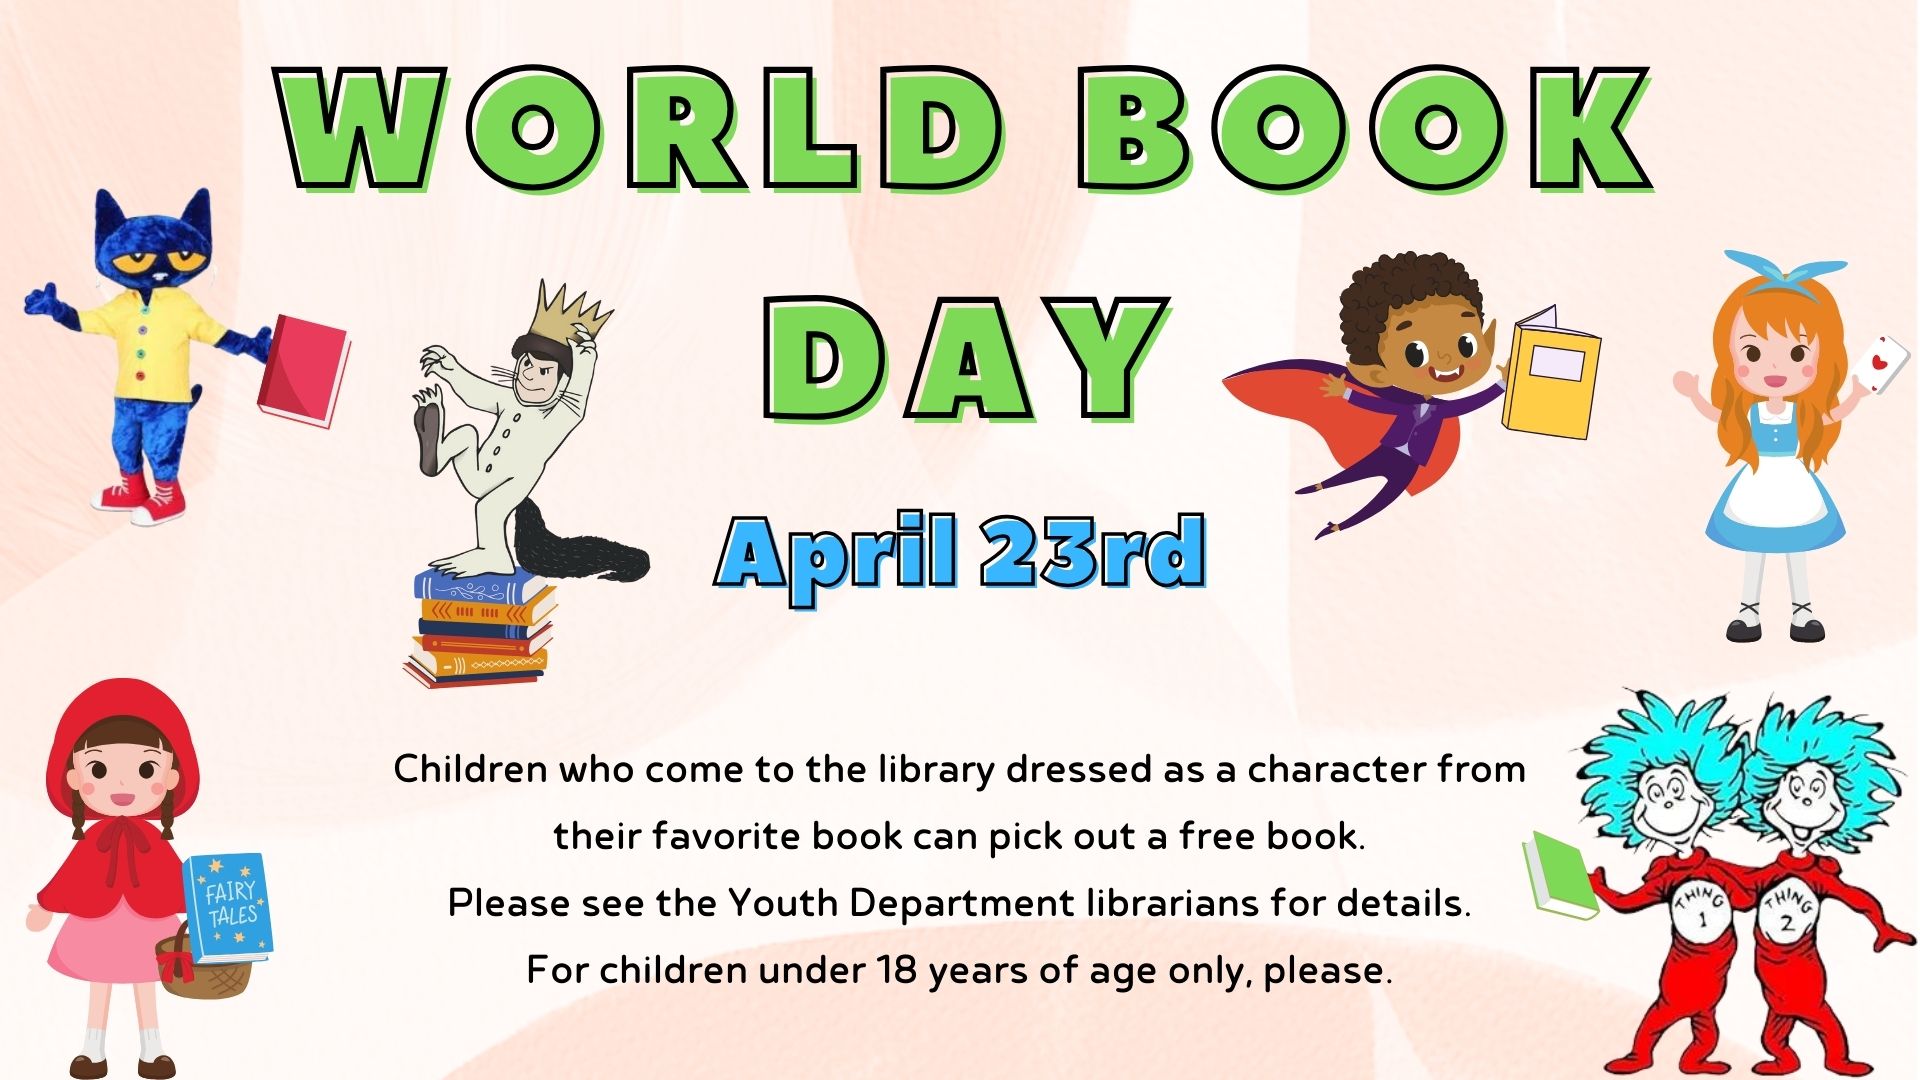 World Book Day, April 23rd